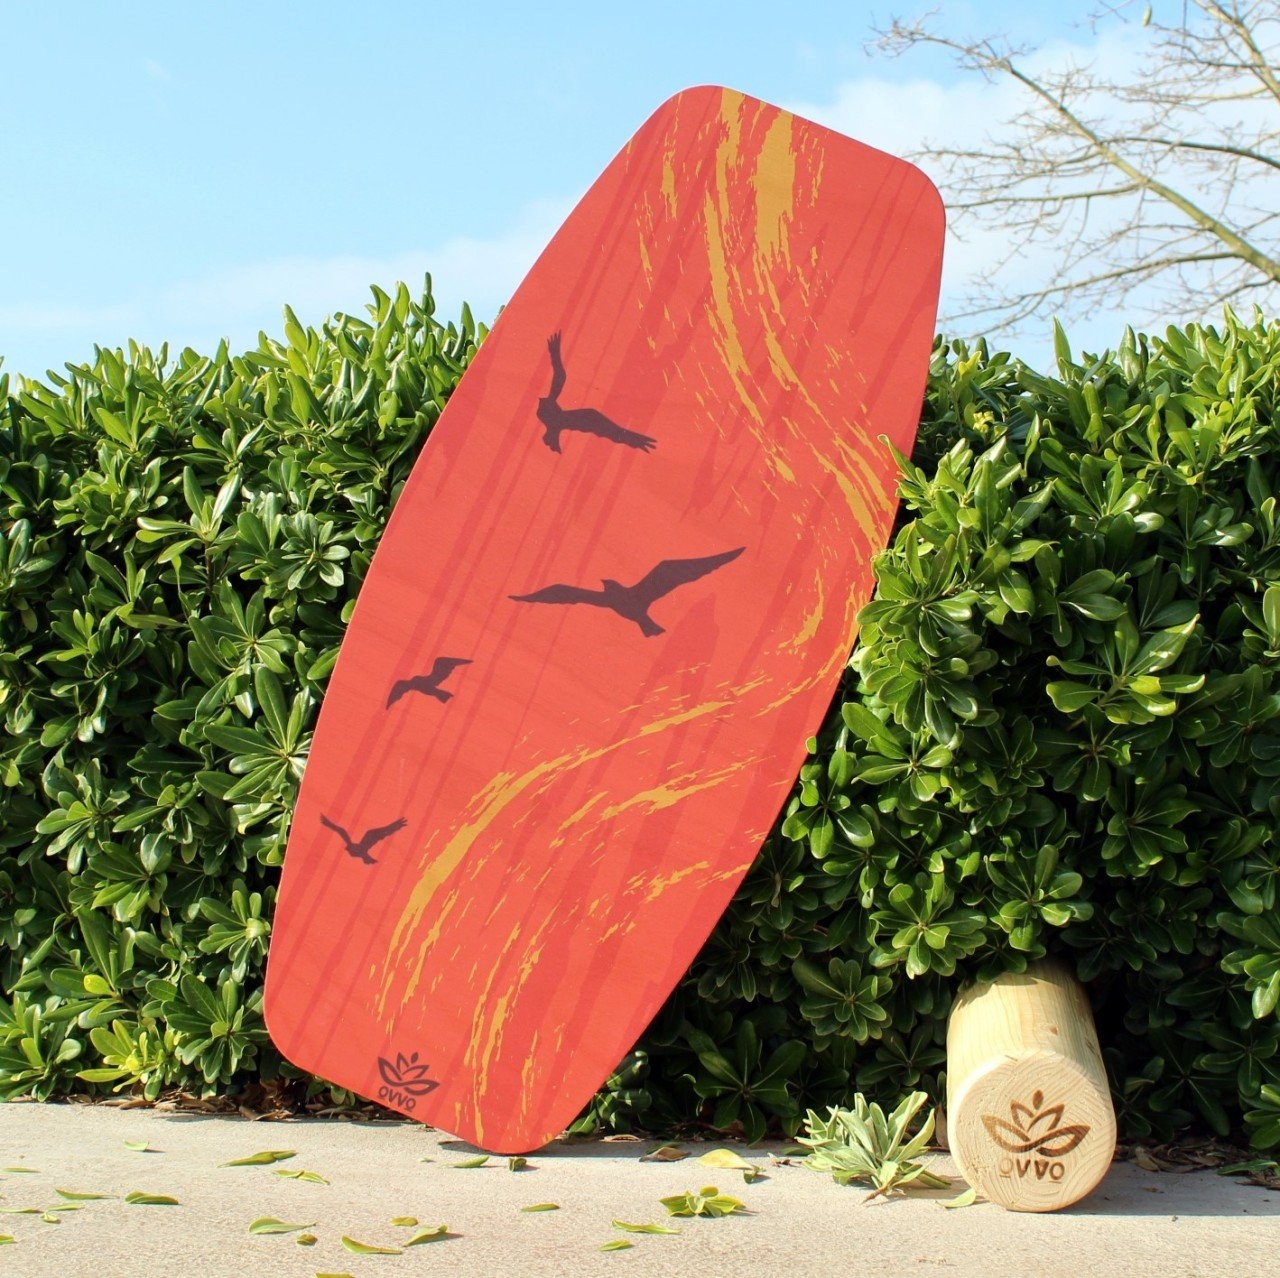 Planche d'équilibre Red Sea | Planche d'équilibre de style surf | Planche d'équilibre en bois | WoodNotion OVVO